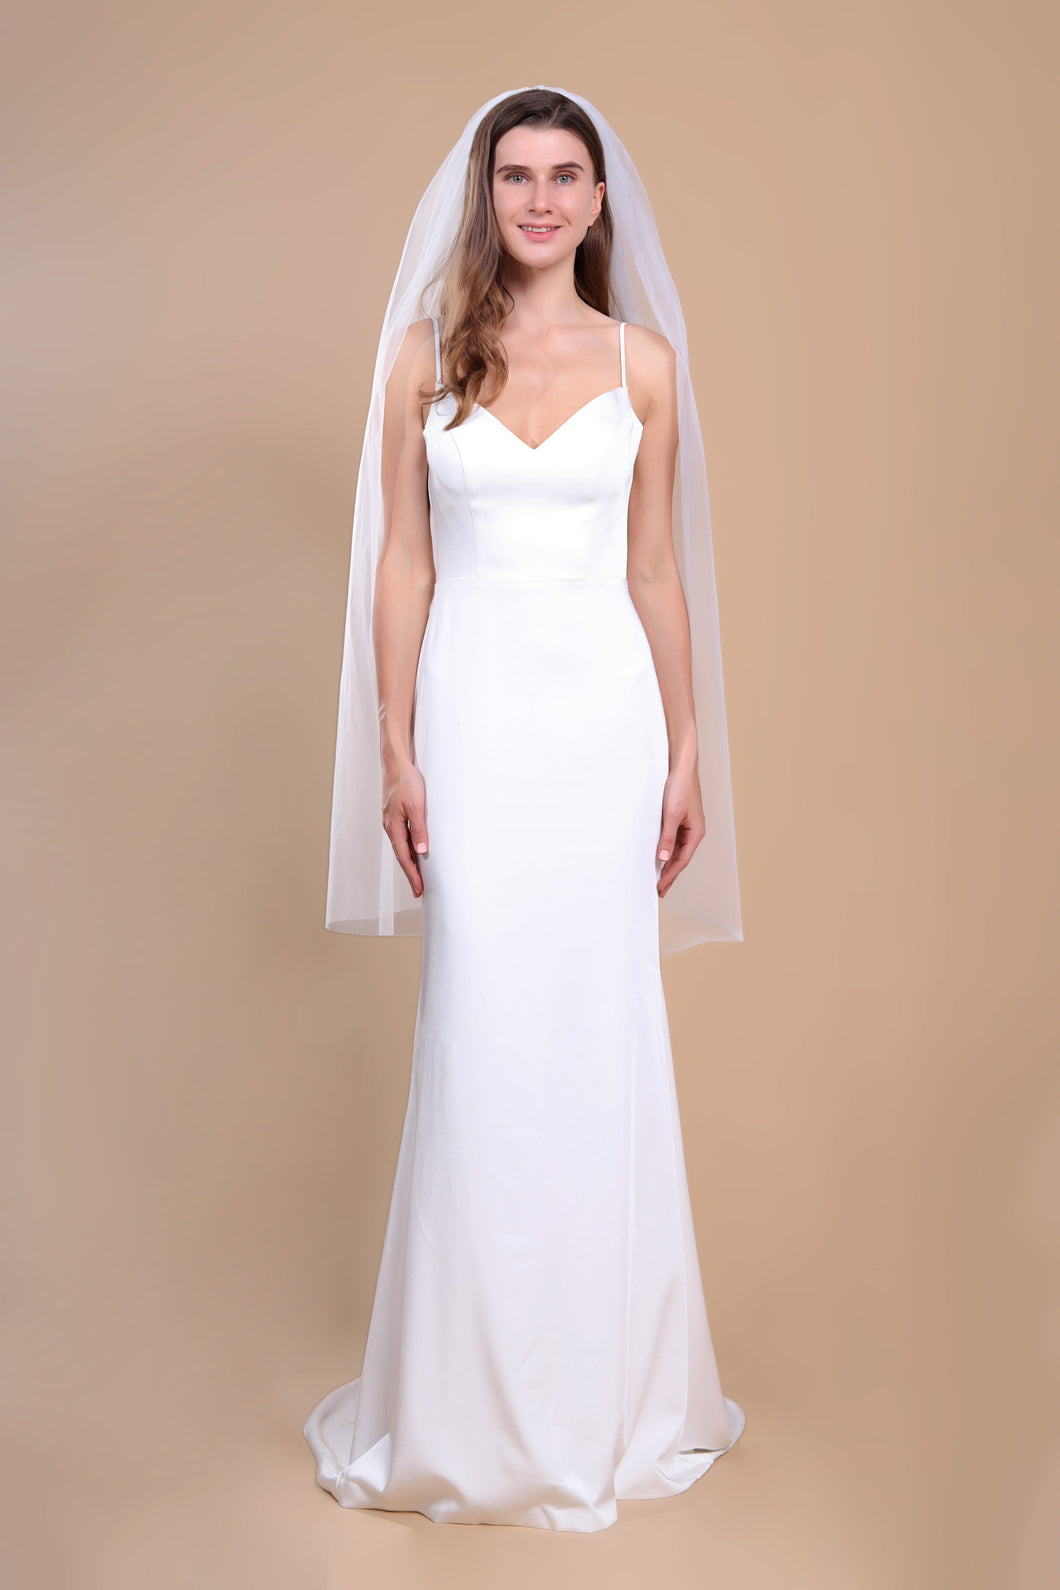 CAMILLA - two-tier layer fingertip length veil with a simple square cut edge